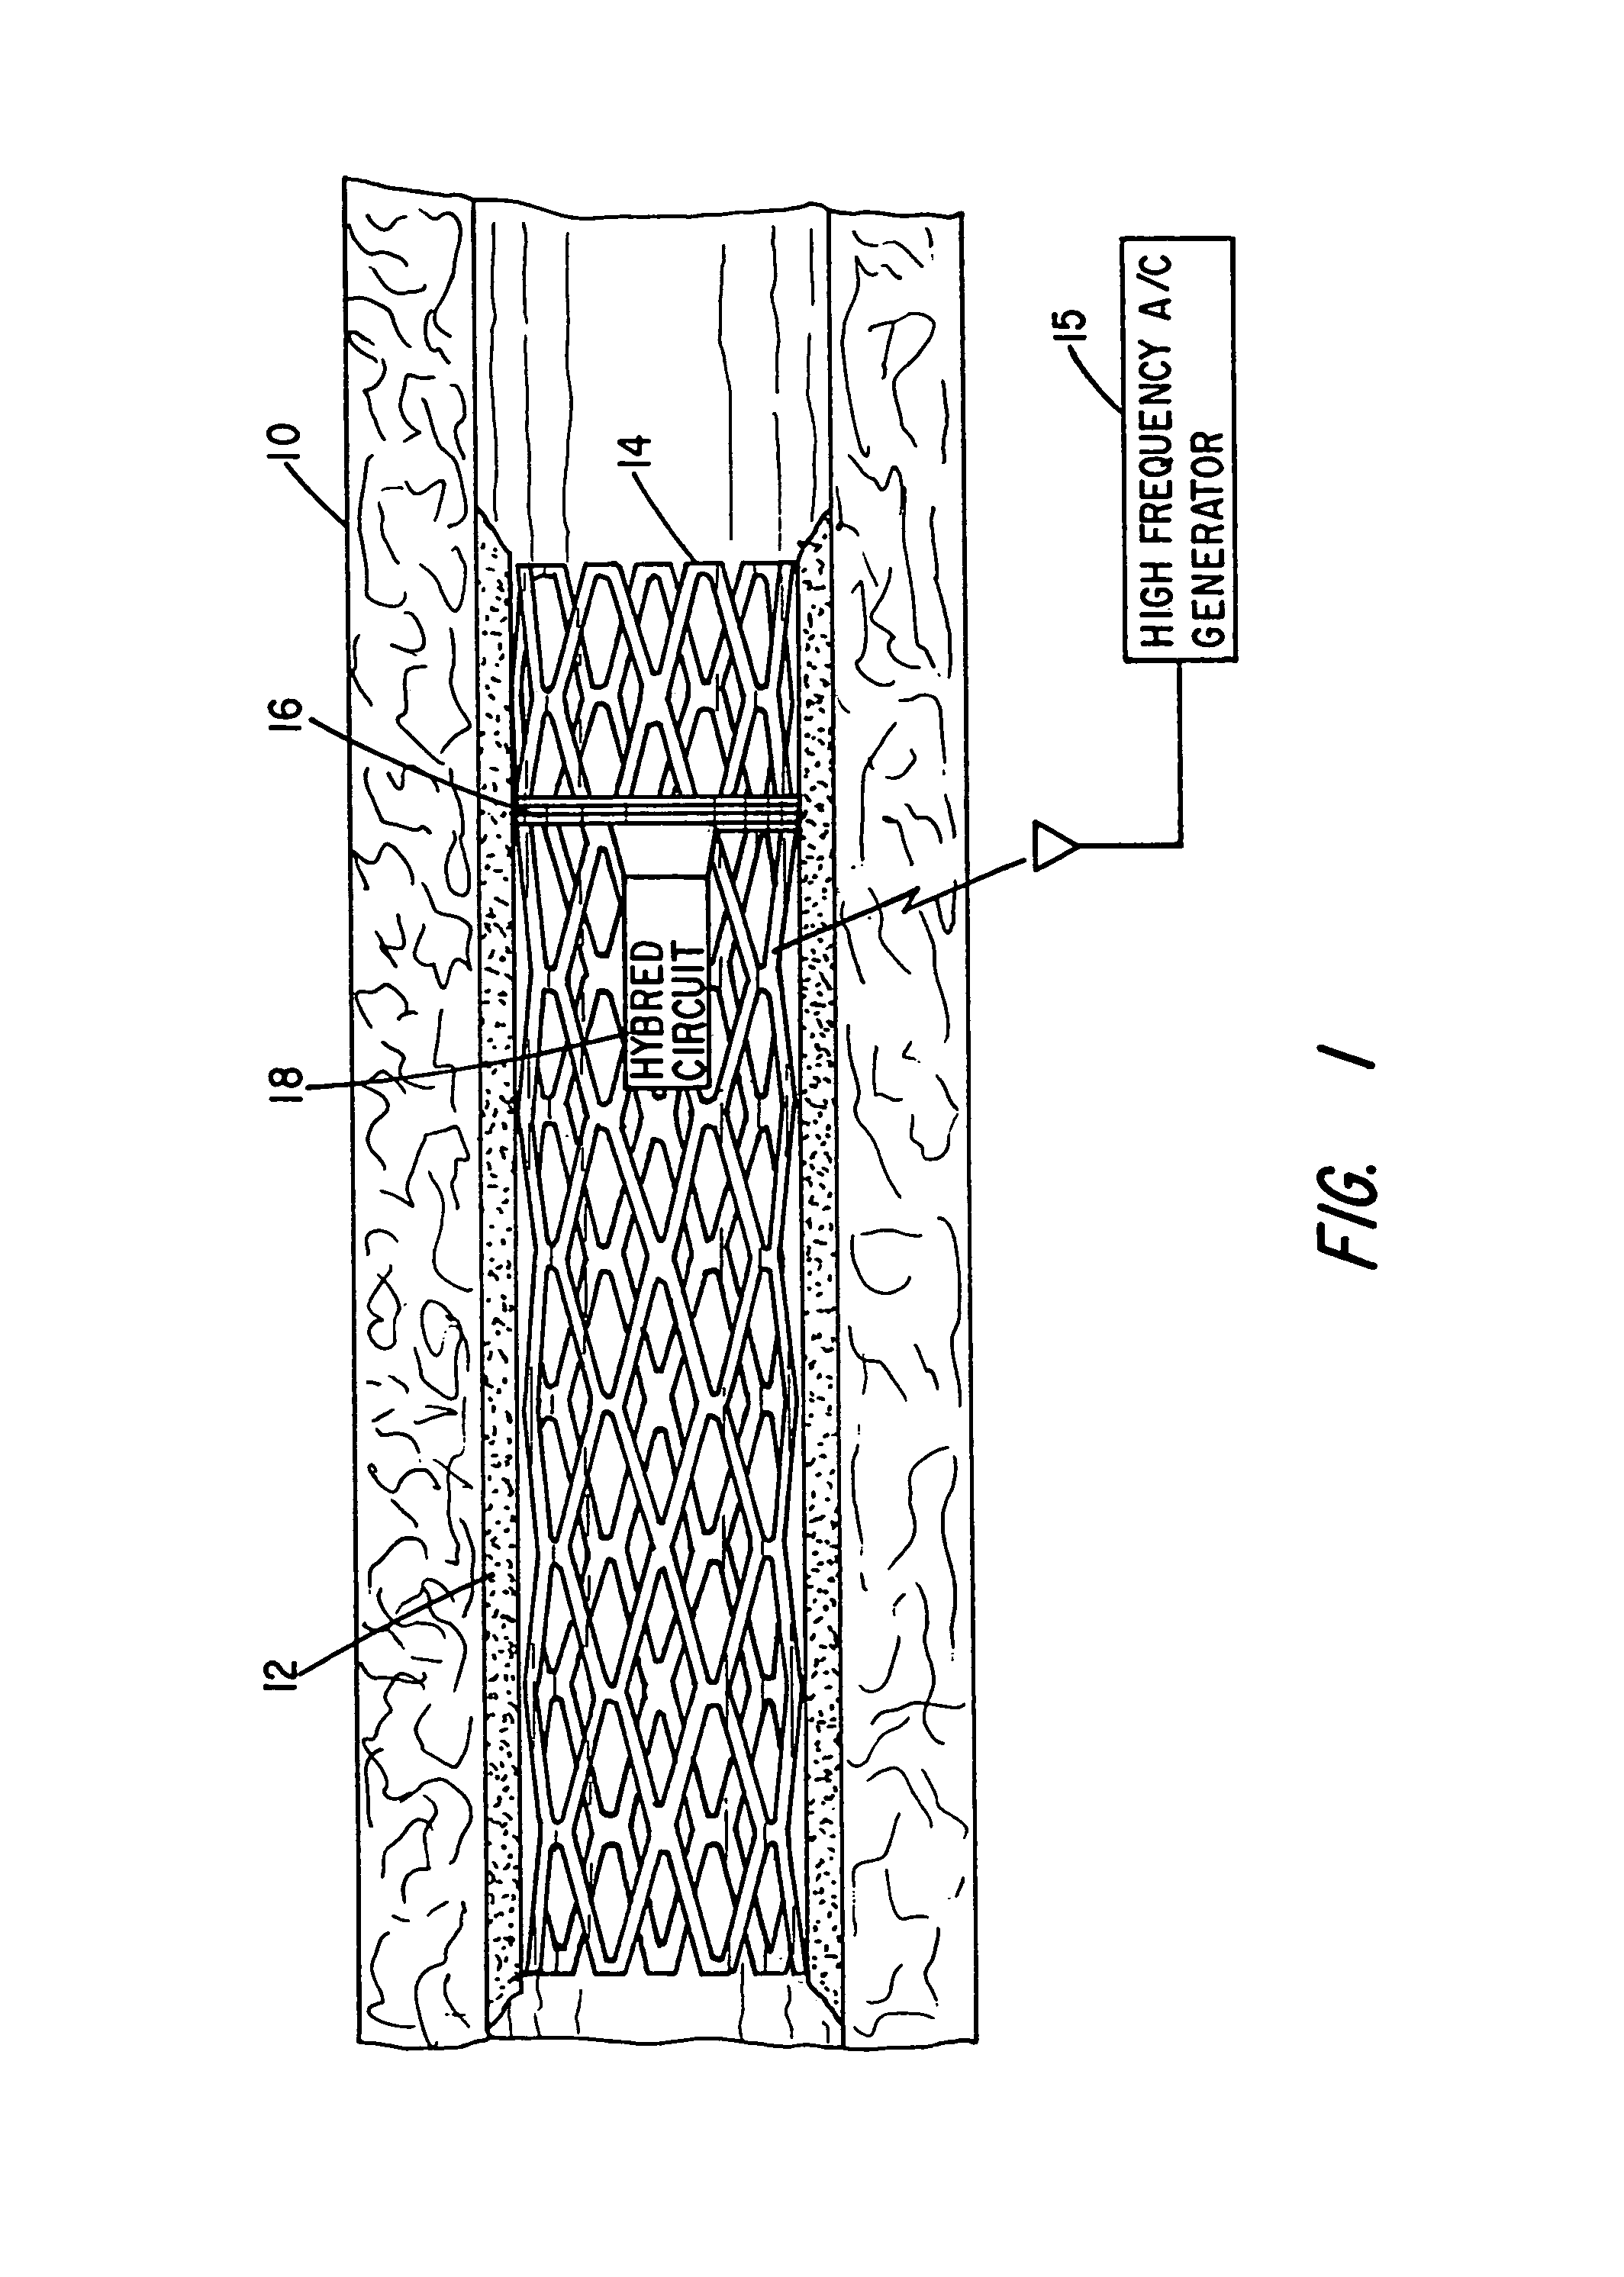 Implantable device for promoting repair of a body lumen